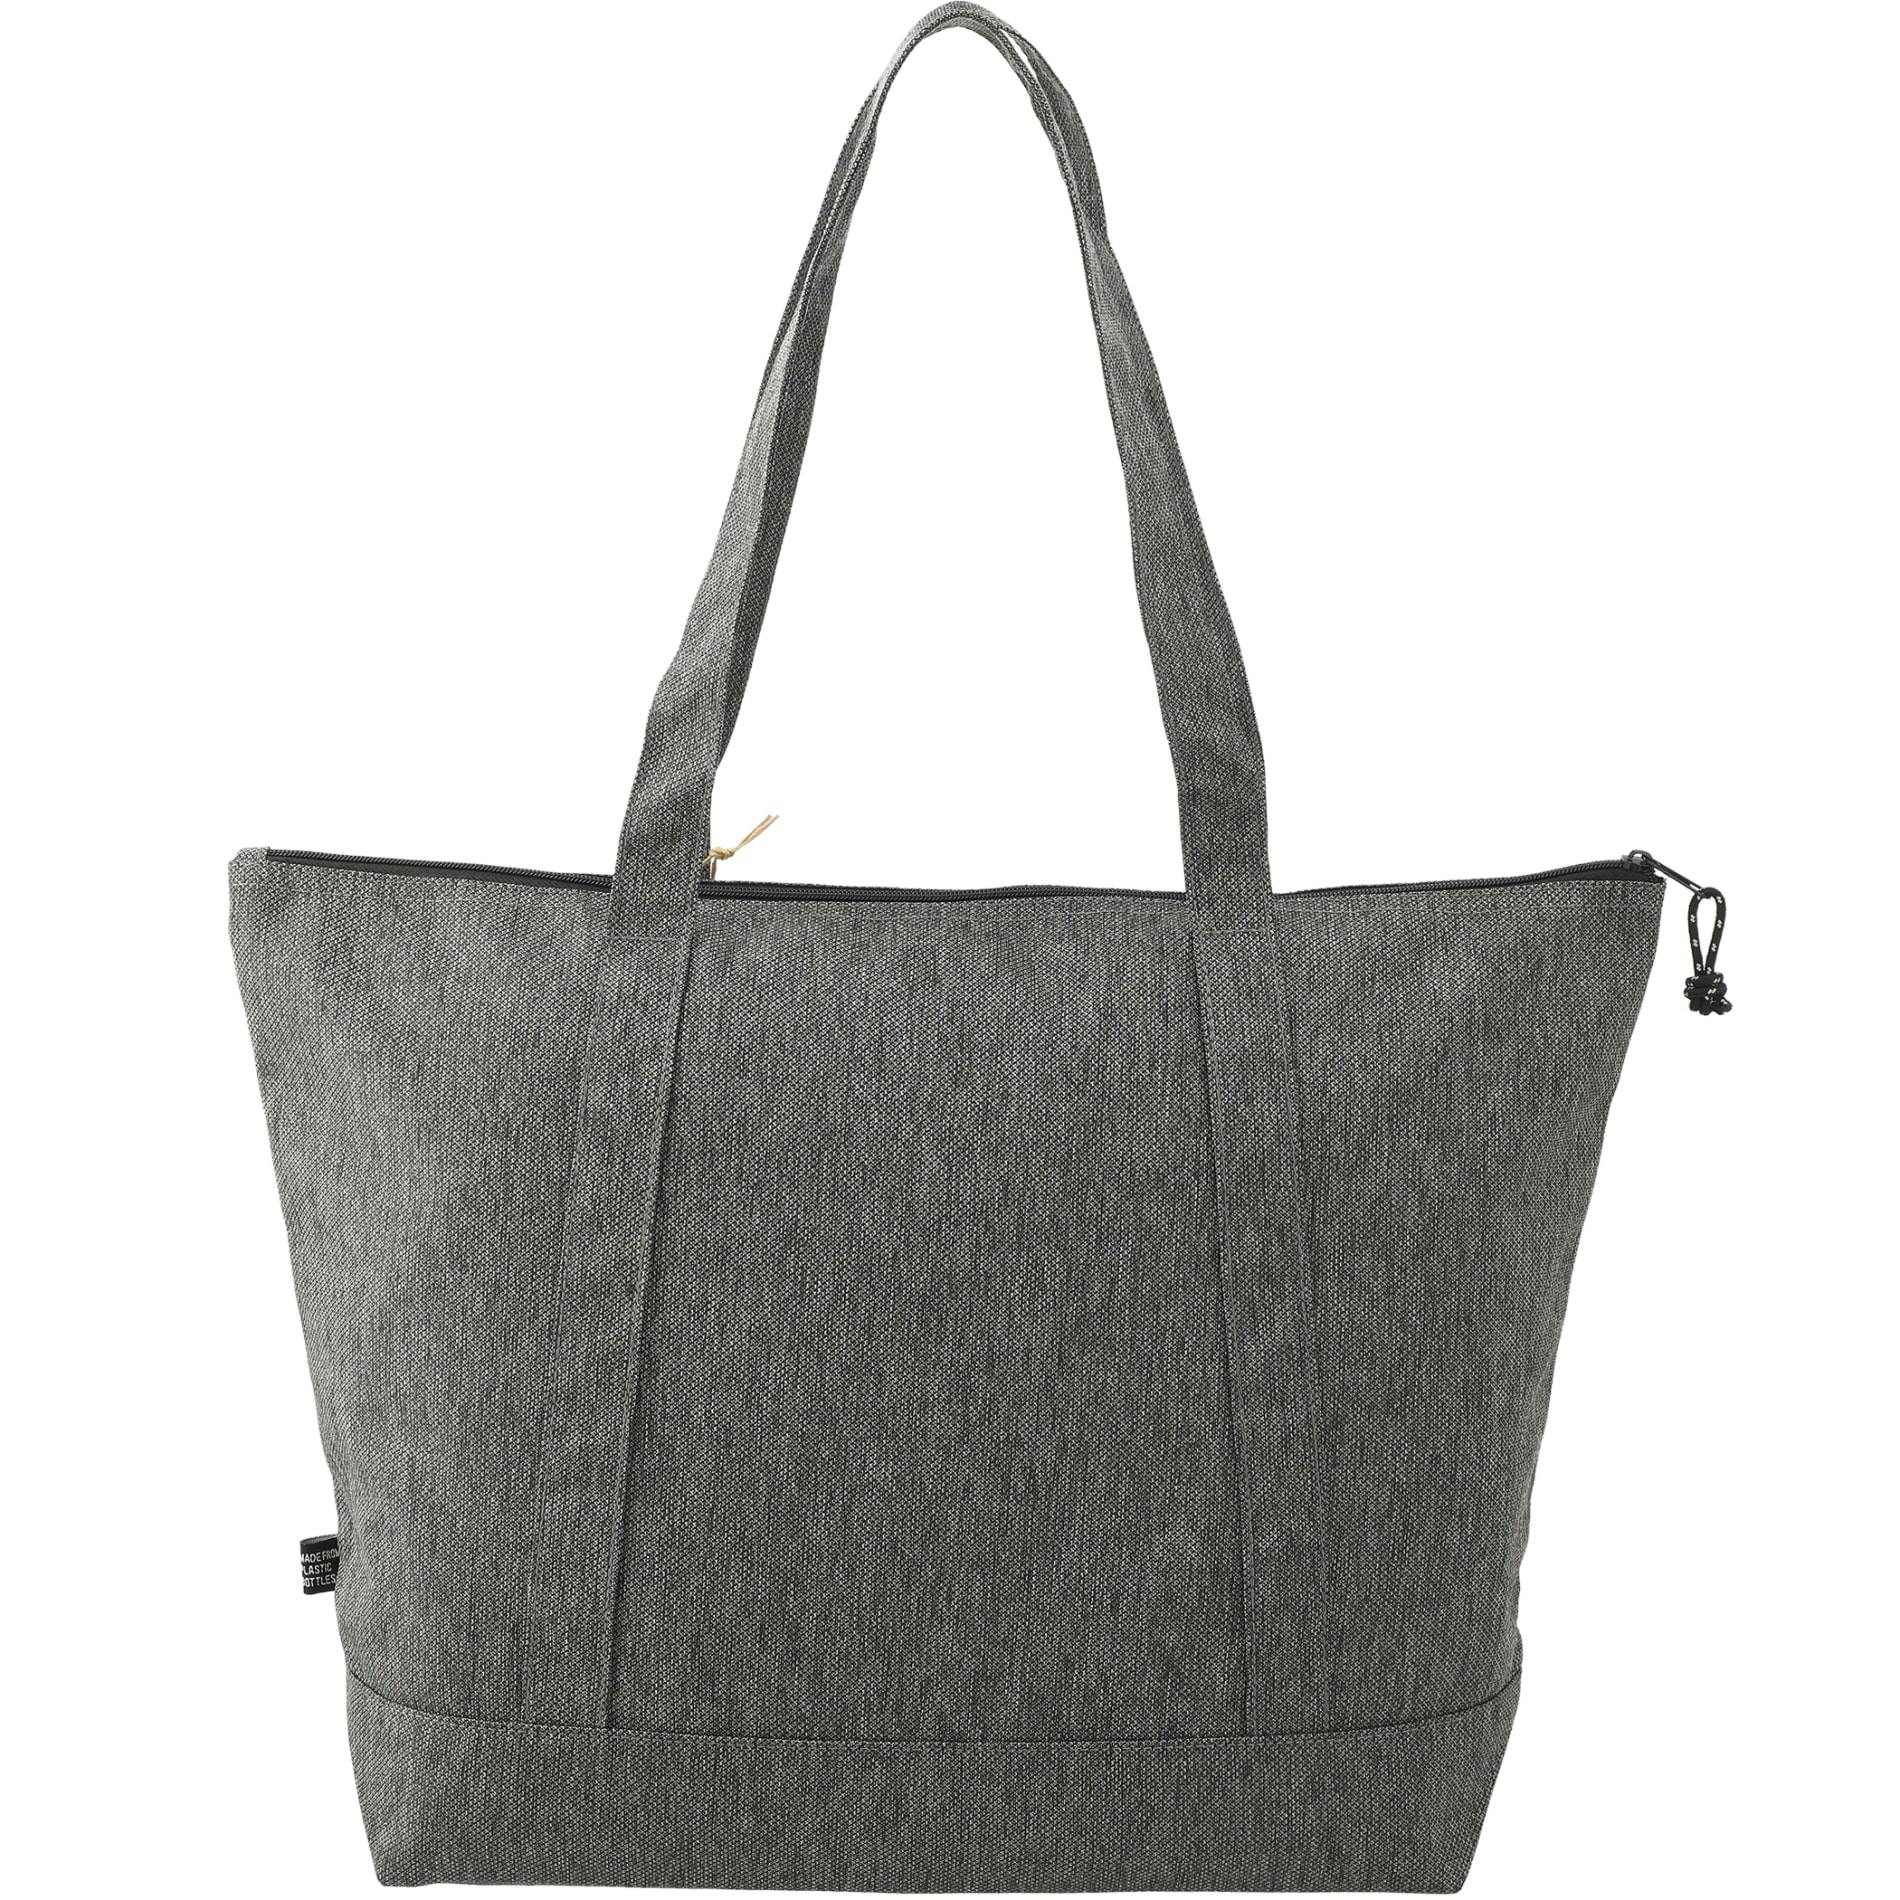 Vila Recycled Boat Tote - additional Image 2